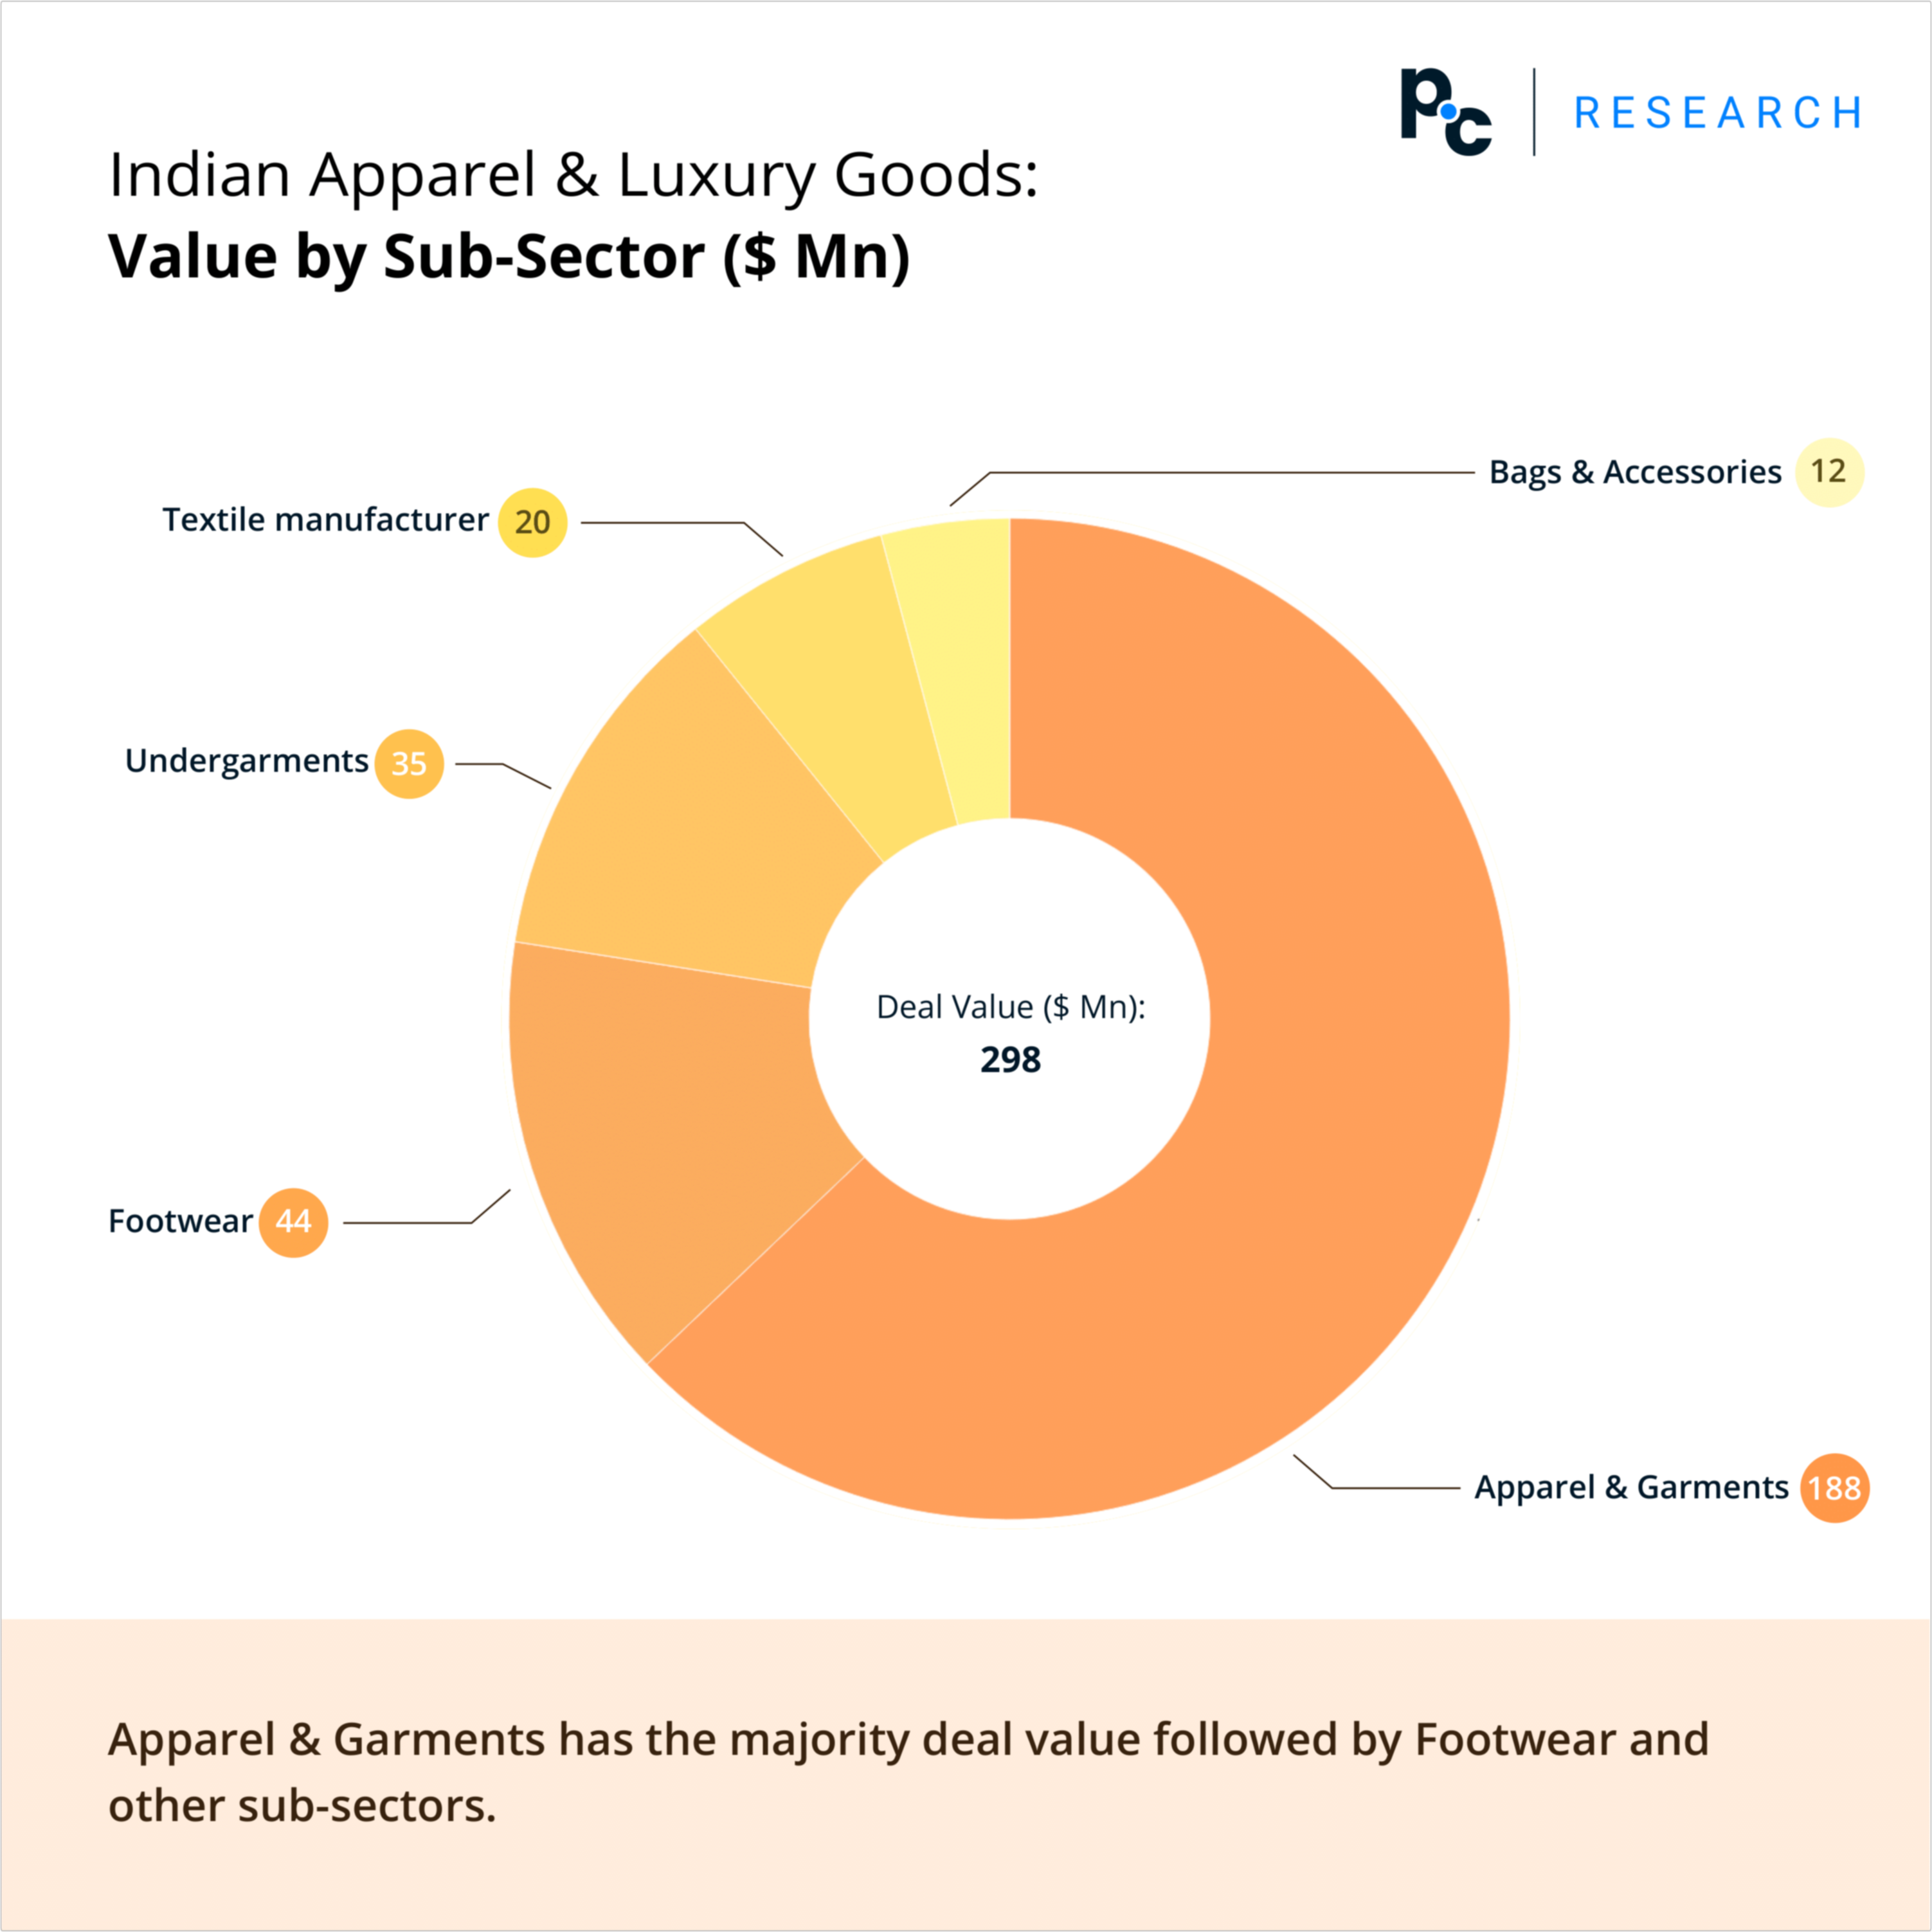 Indian Apparel & Luxury Goods: Value by Sub-Sector ($ Mn).

Apparel & Garments has the majority deal value followed by Footwear and other sub-sectors.
